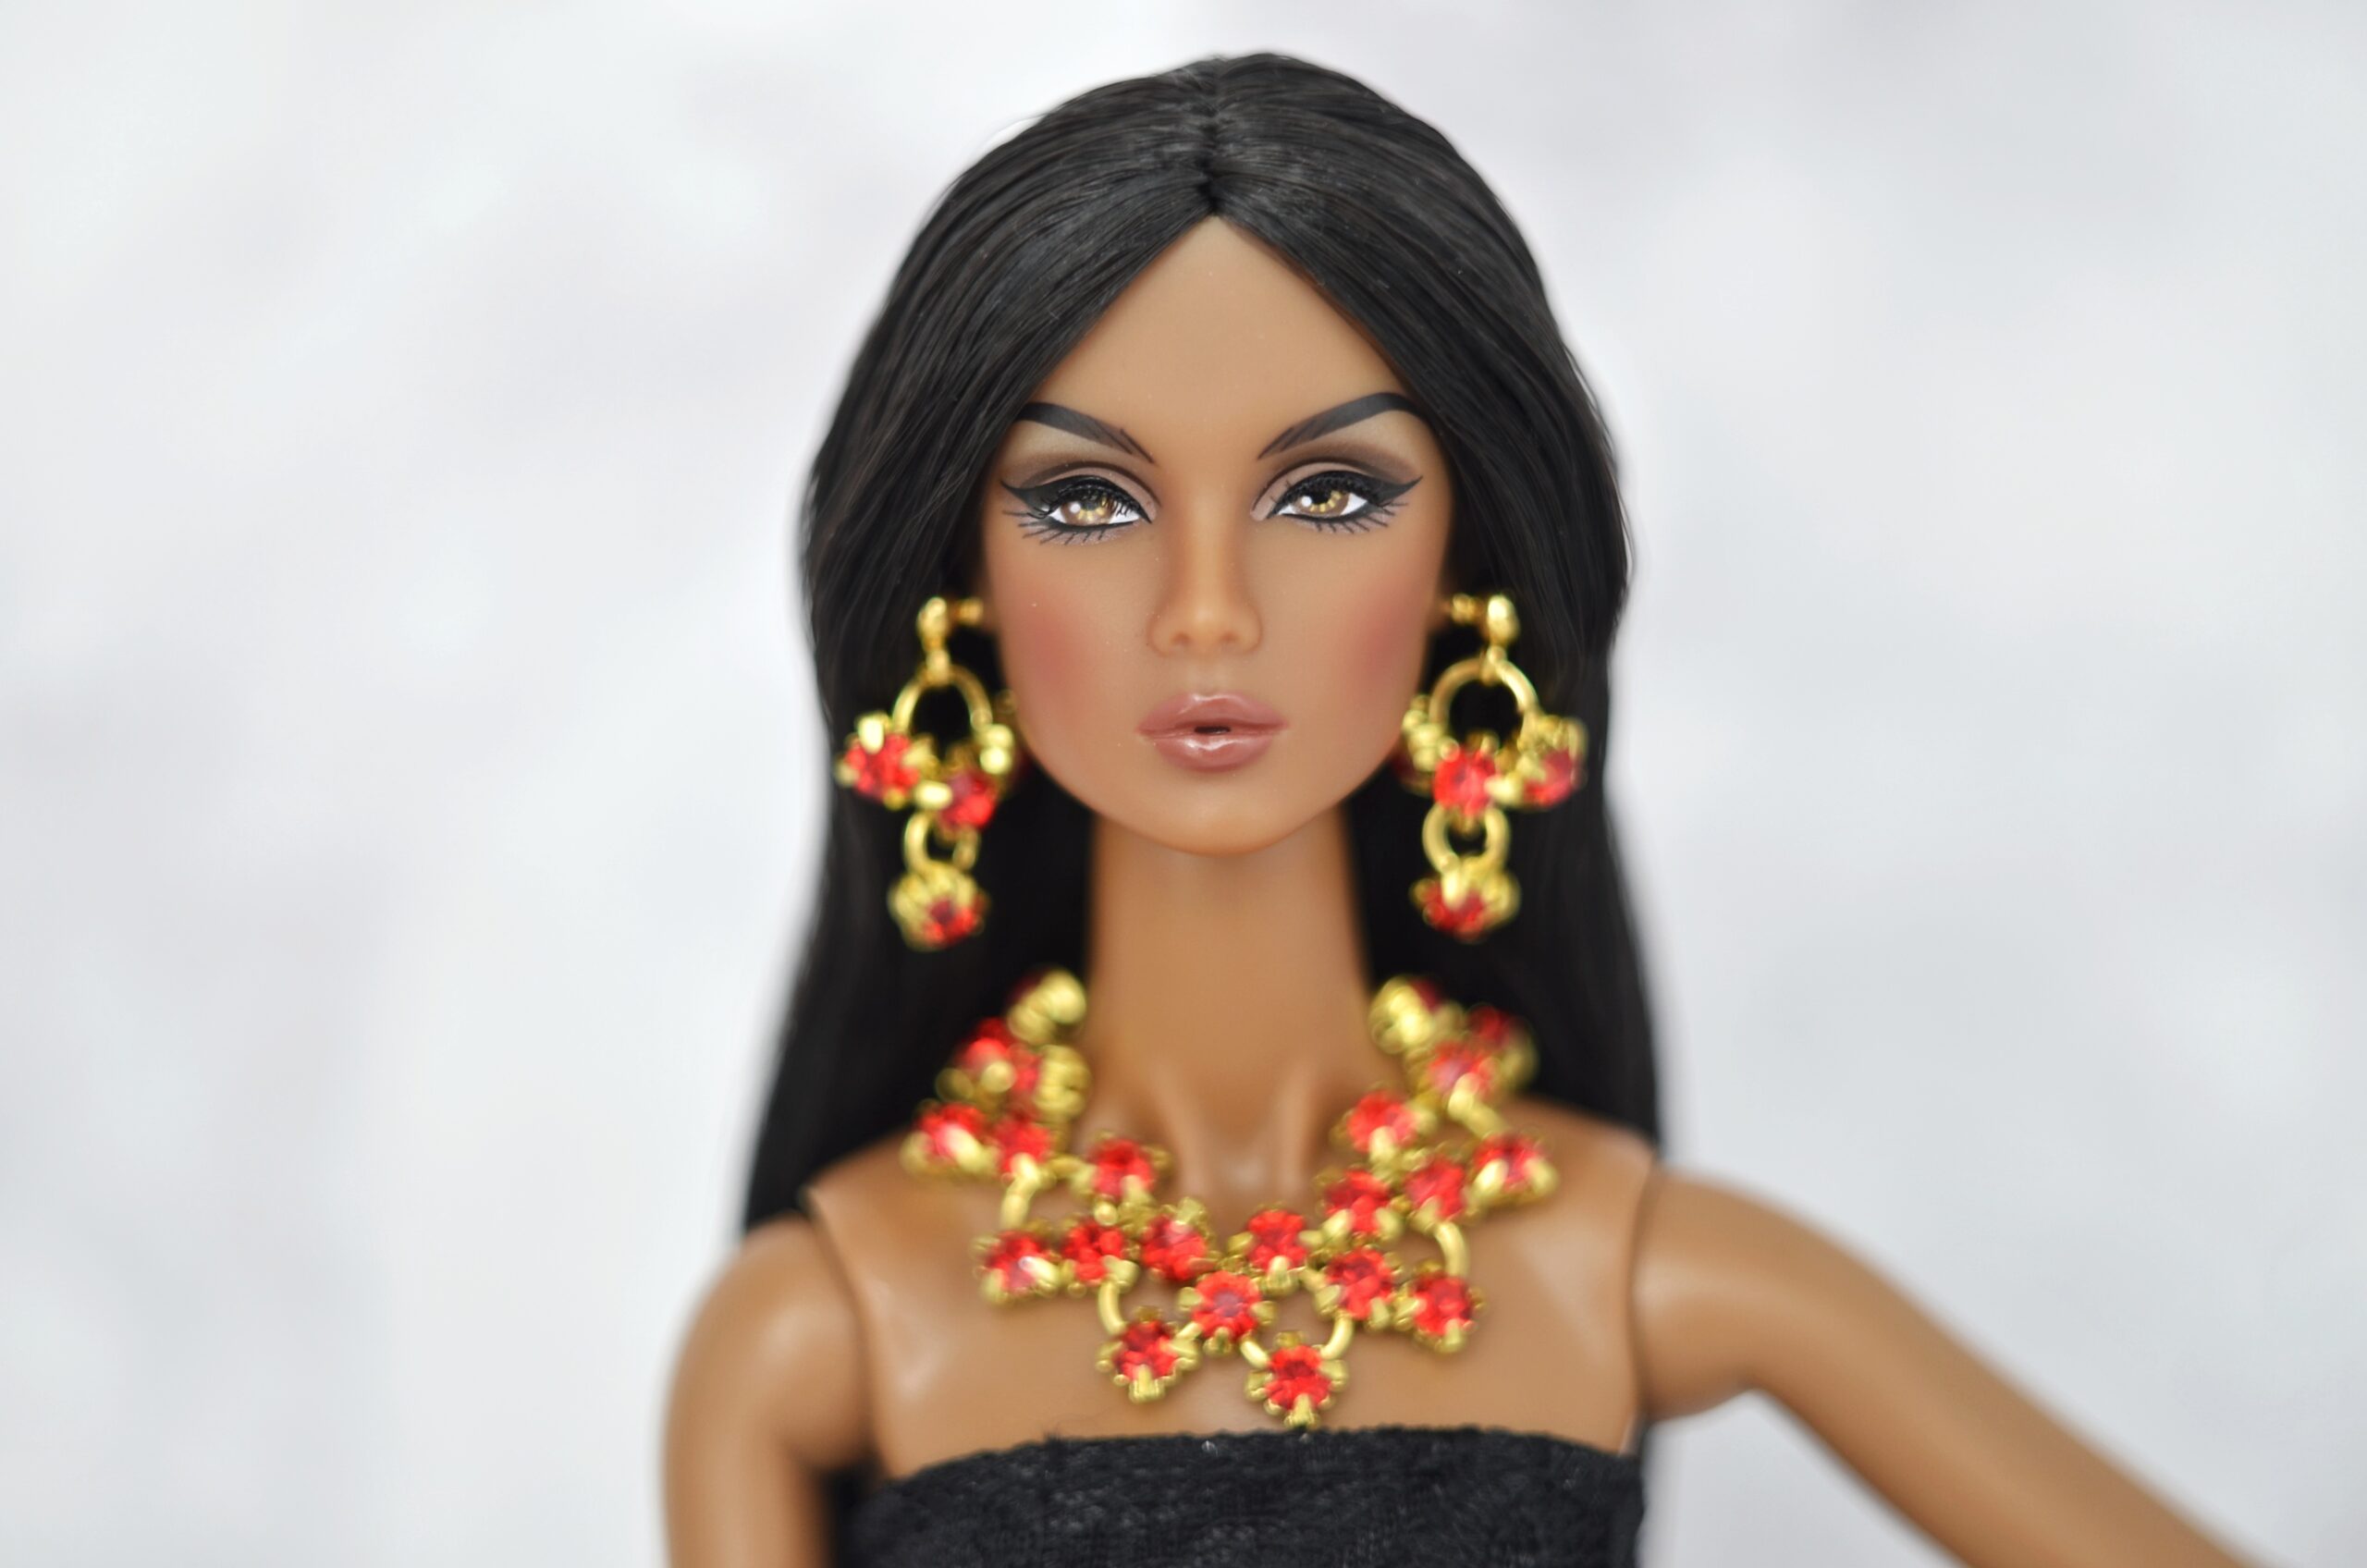 Set of rhinestone jewelry for dolls Nu face Poppy Parker Barbie FR doll adornment